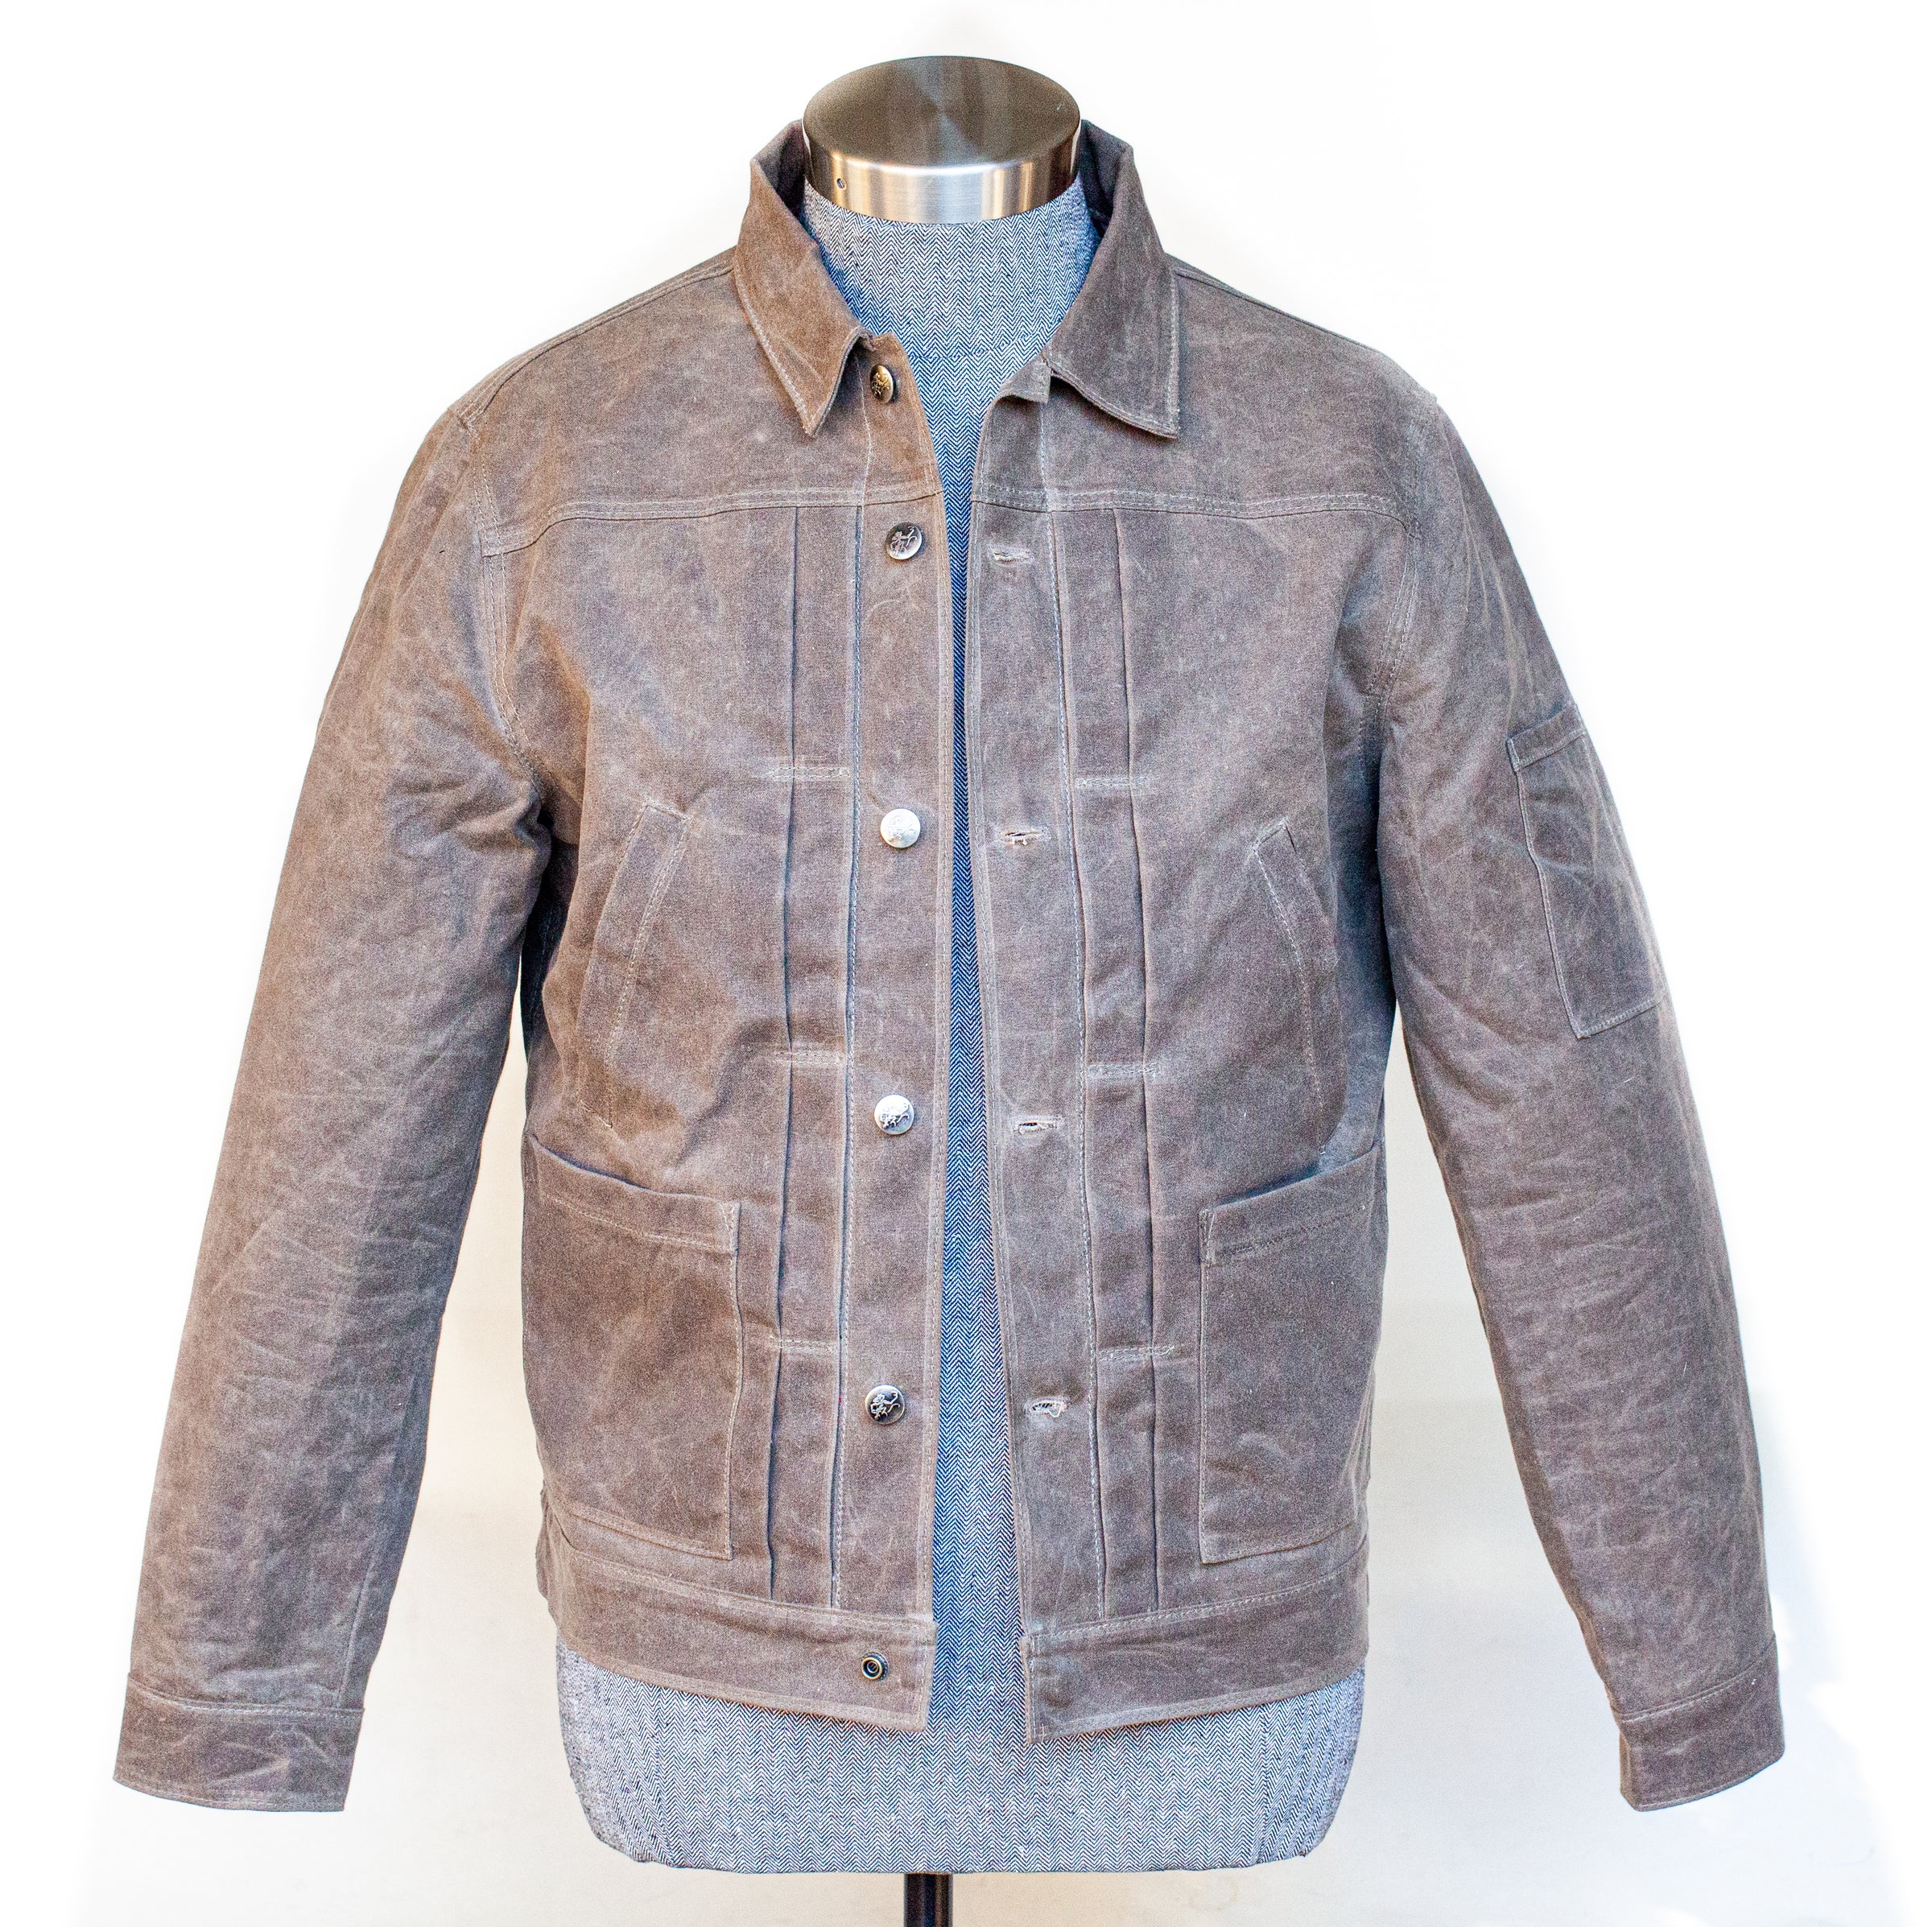 Red Monkey Jackets | Musician Style Waxed Canvas Jackets – Red Monkey ...